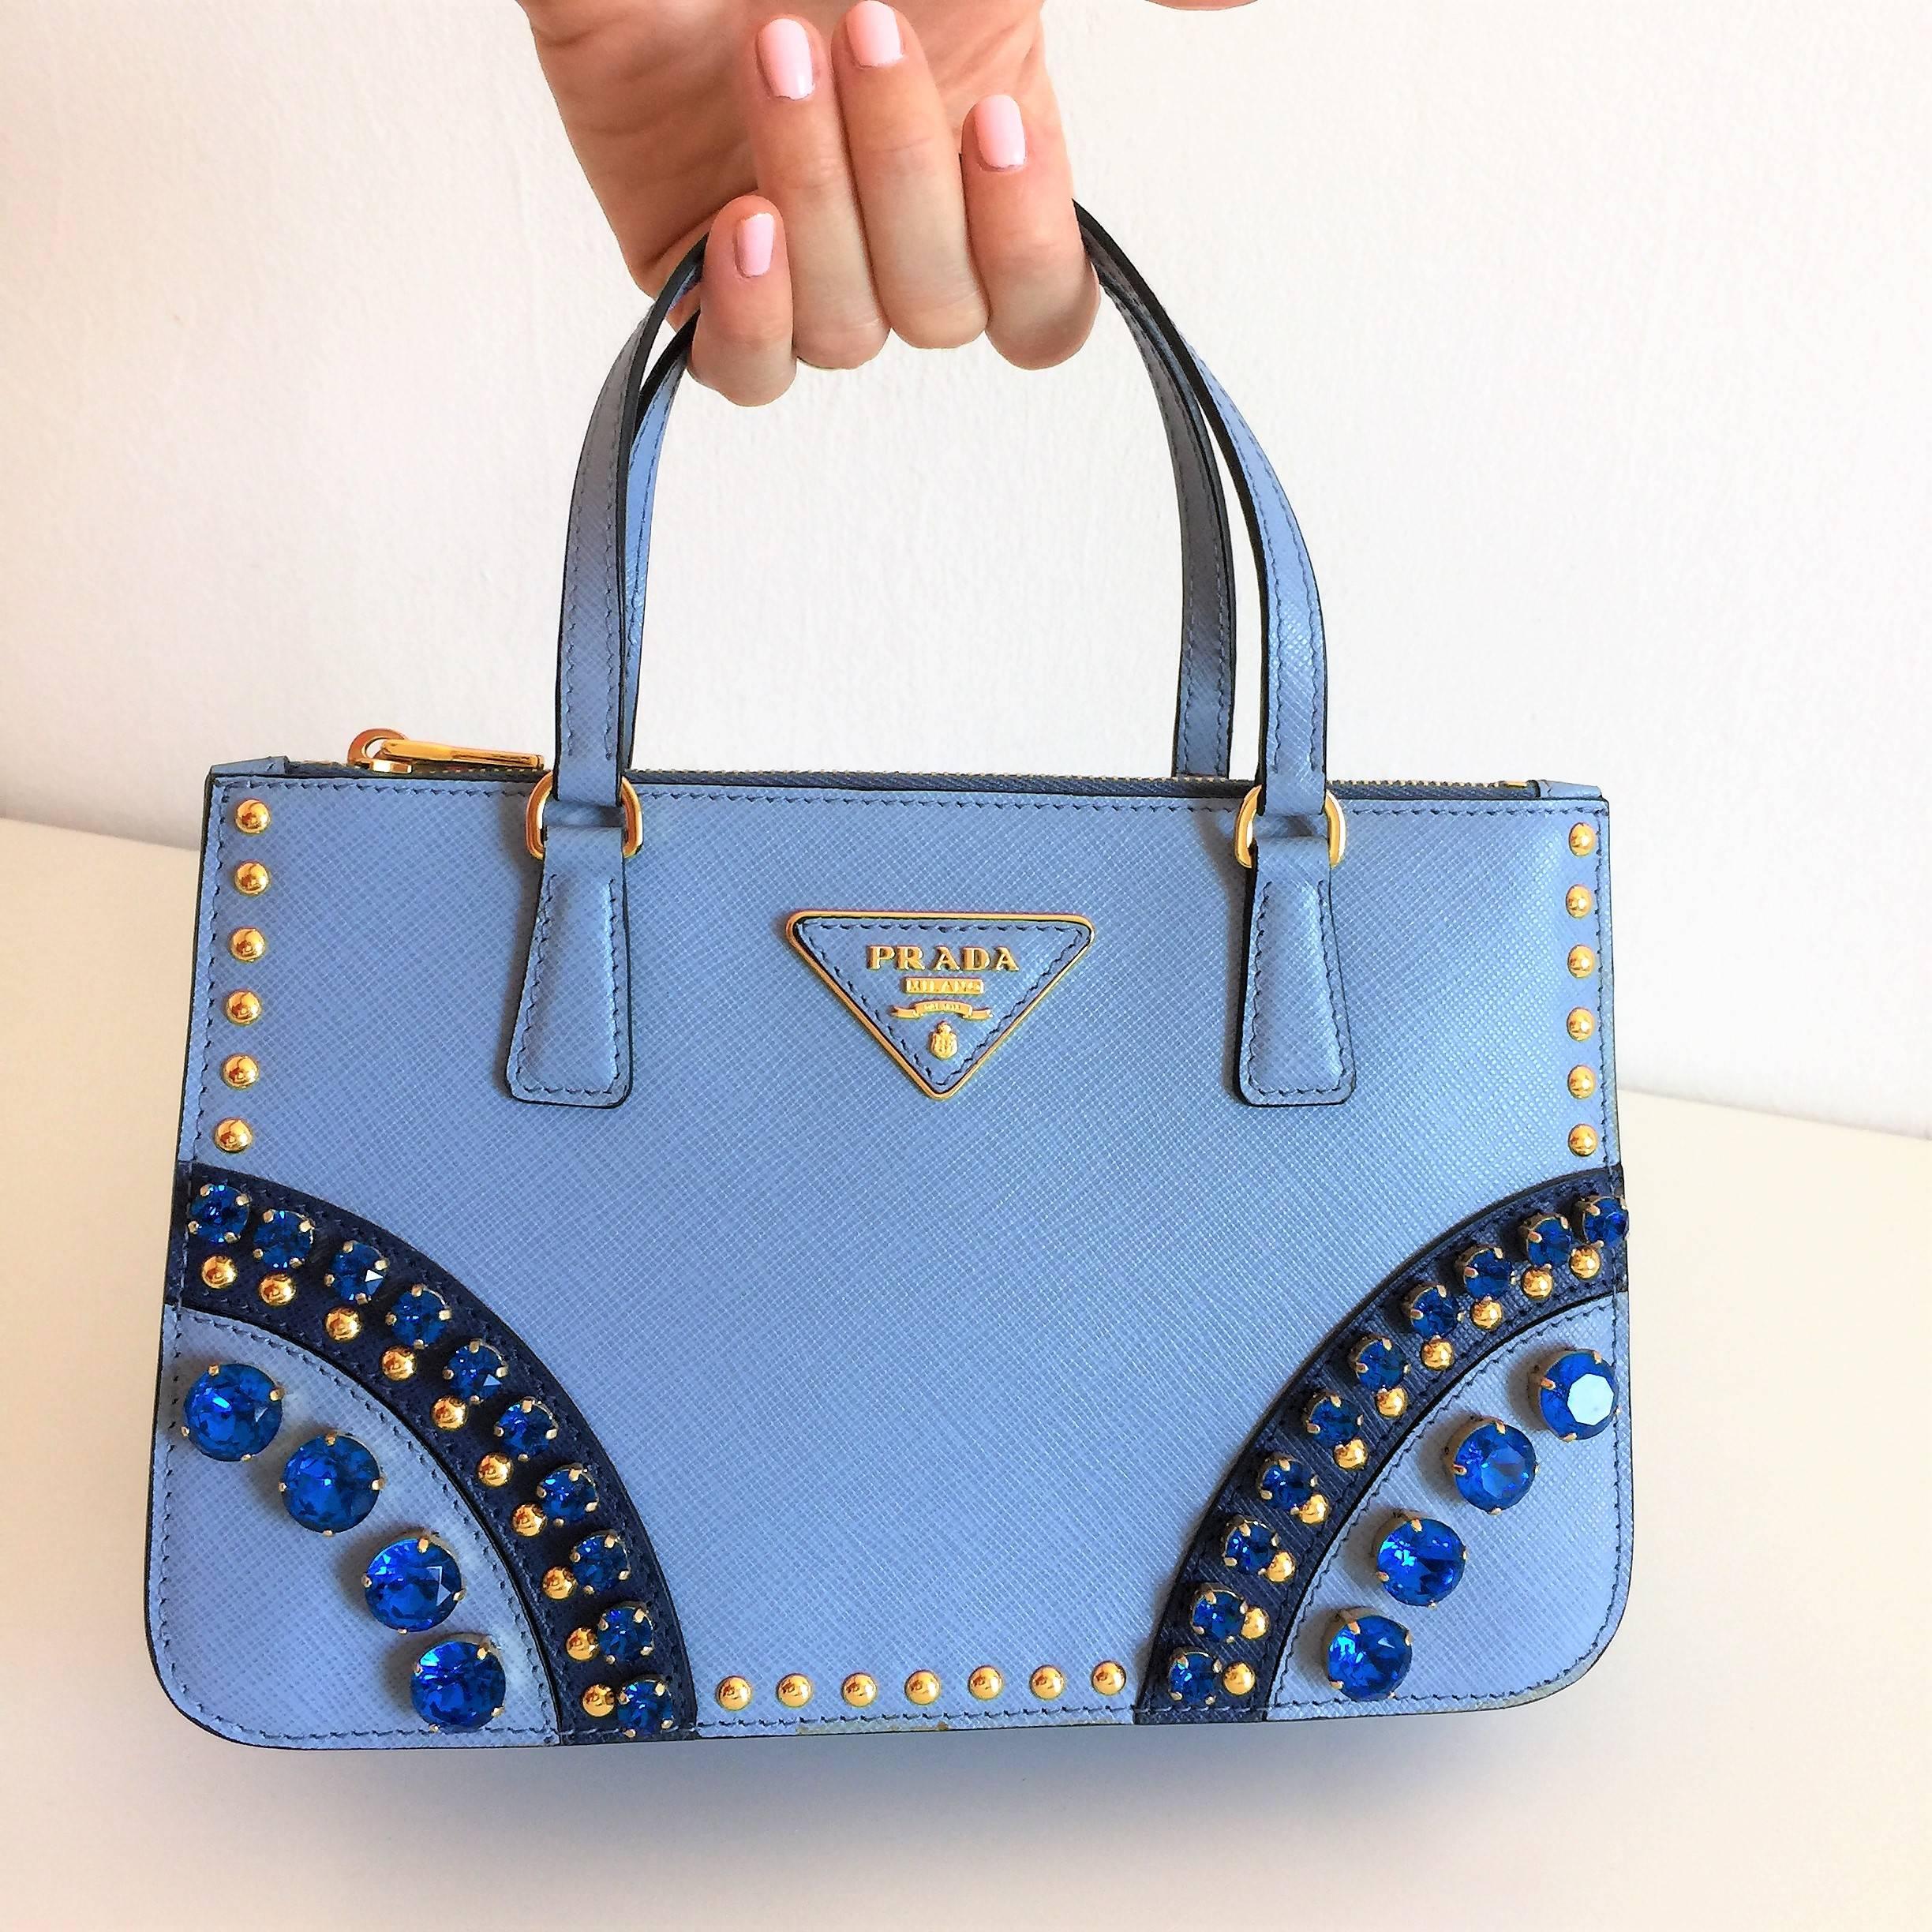 PRADA Bijoux Saffiano, Jewels Hand Bag Blue, ref. B1142B.
Condition; New, unused bag, with a little stain in one handle.
Retail price: over $2500.
Dim.: cm. 23 × 15 × 9     (9